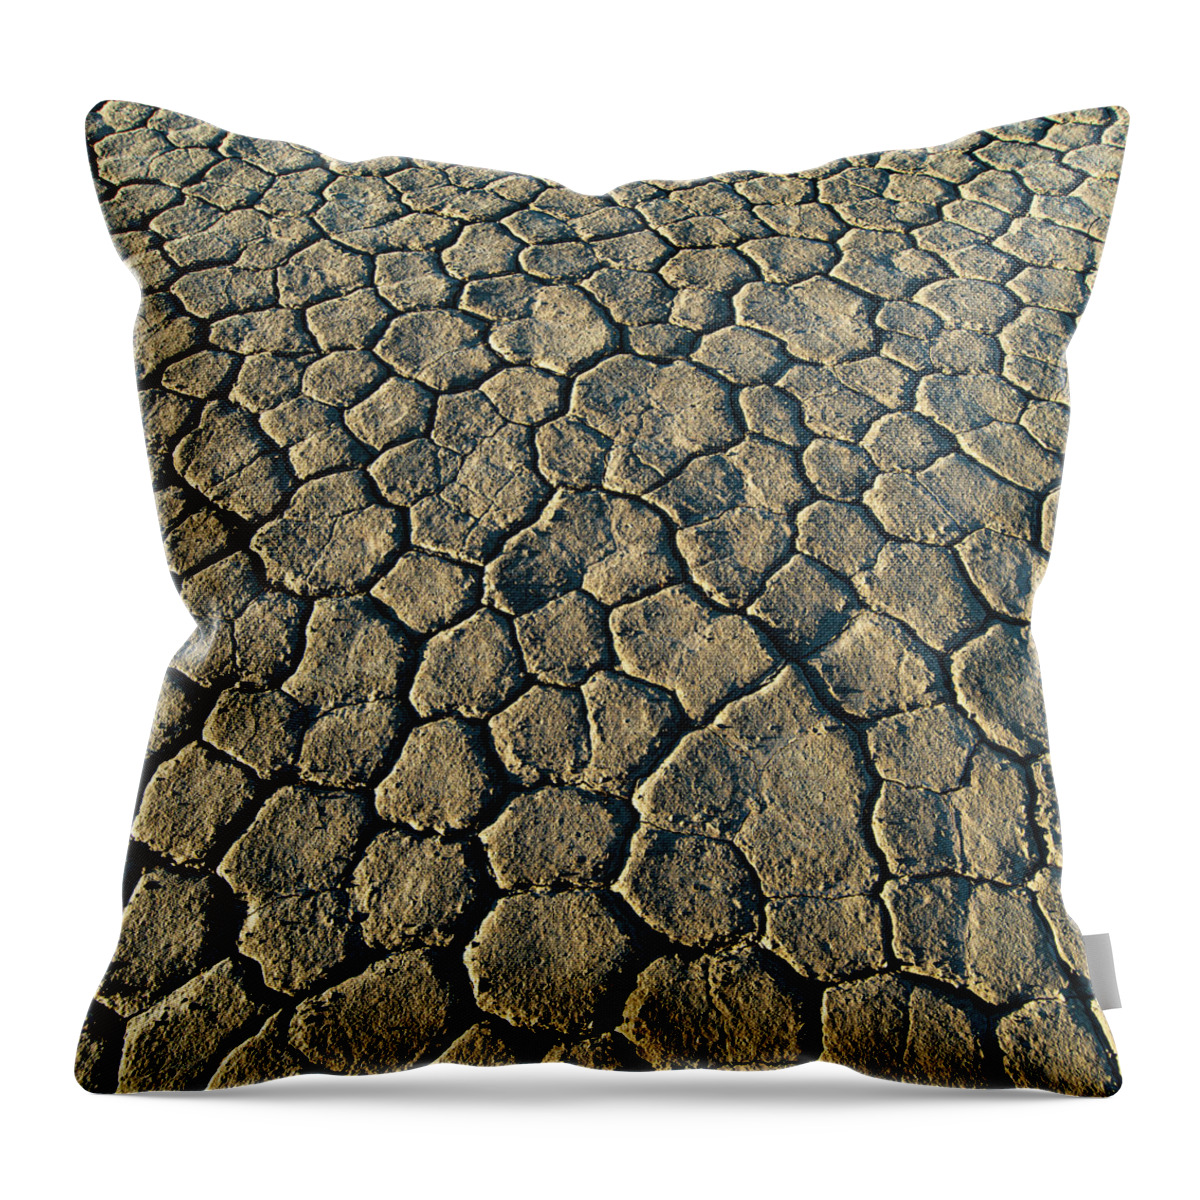 Dry Throw Pillow featuring the photograph Cracked Earth I by William Dickman